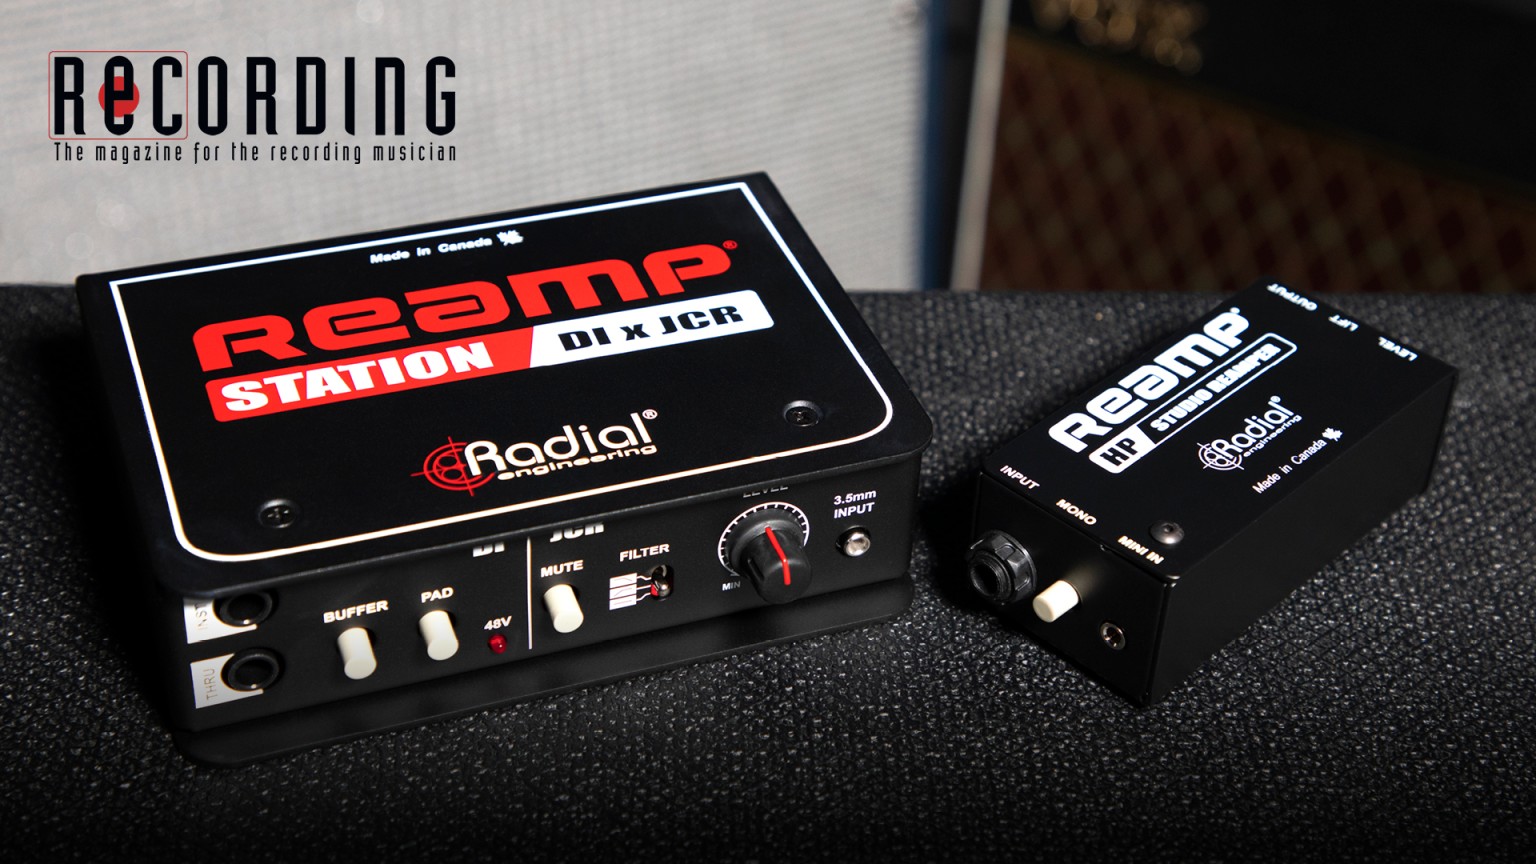 Recording Magazine Reviews the Reamp® Station and Reamp® HP